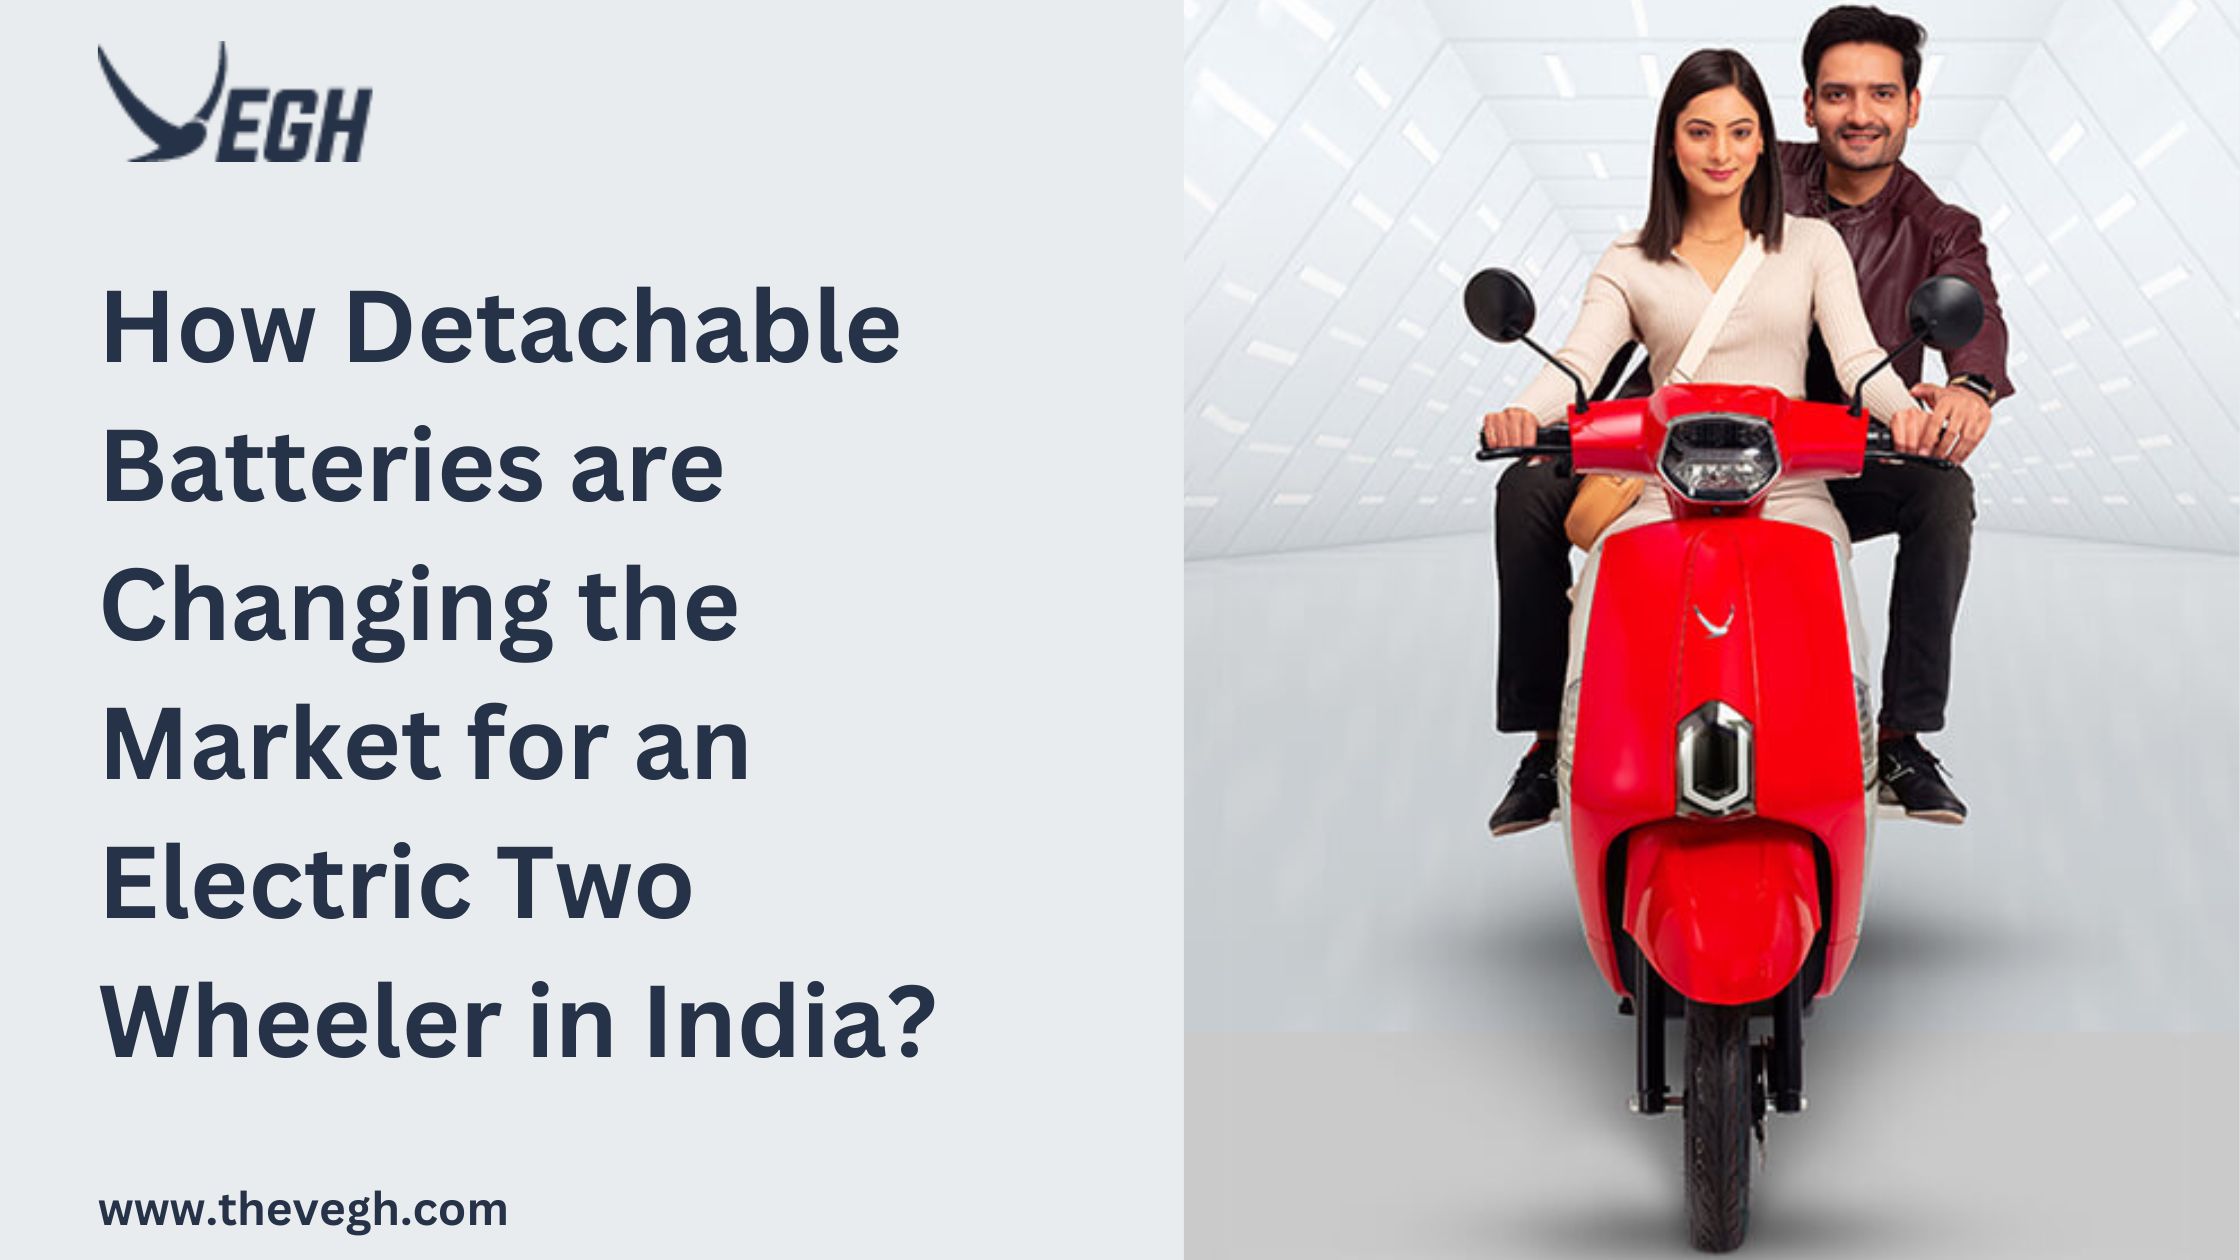 How detachable batteries are changing the market for an electric two wheeler in India?